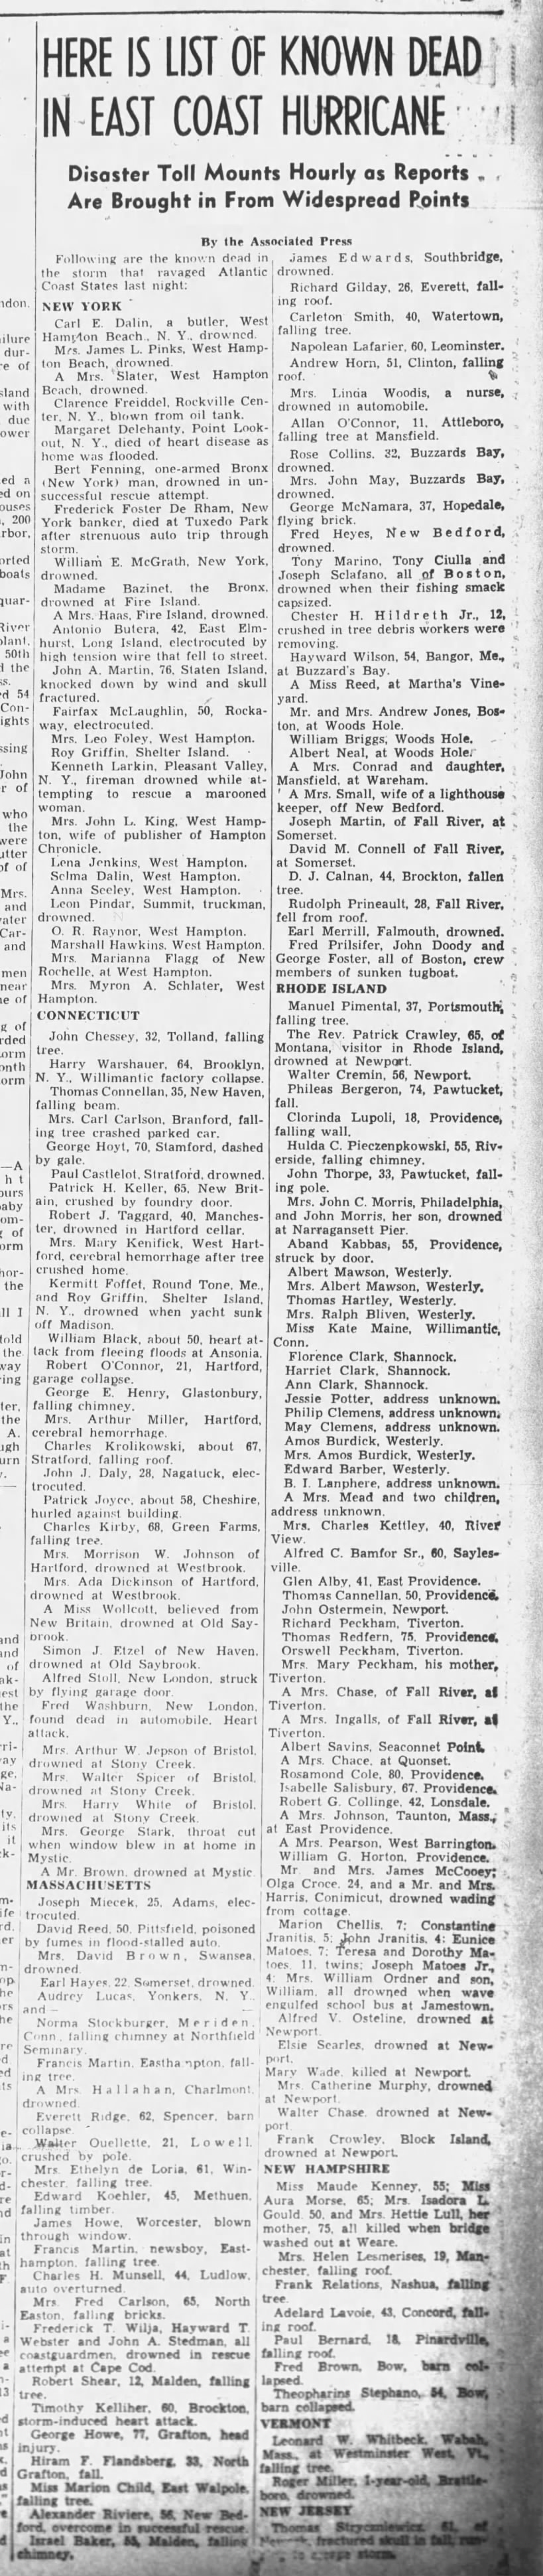 List of known dead day after 1938 hurricane